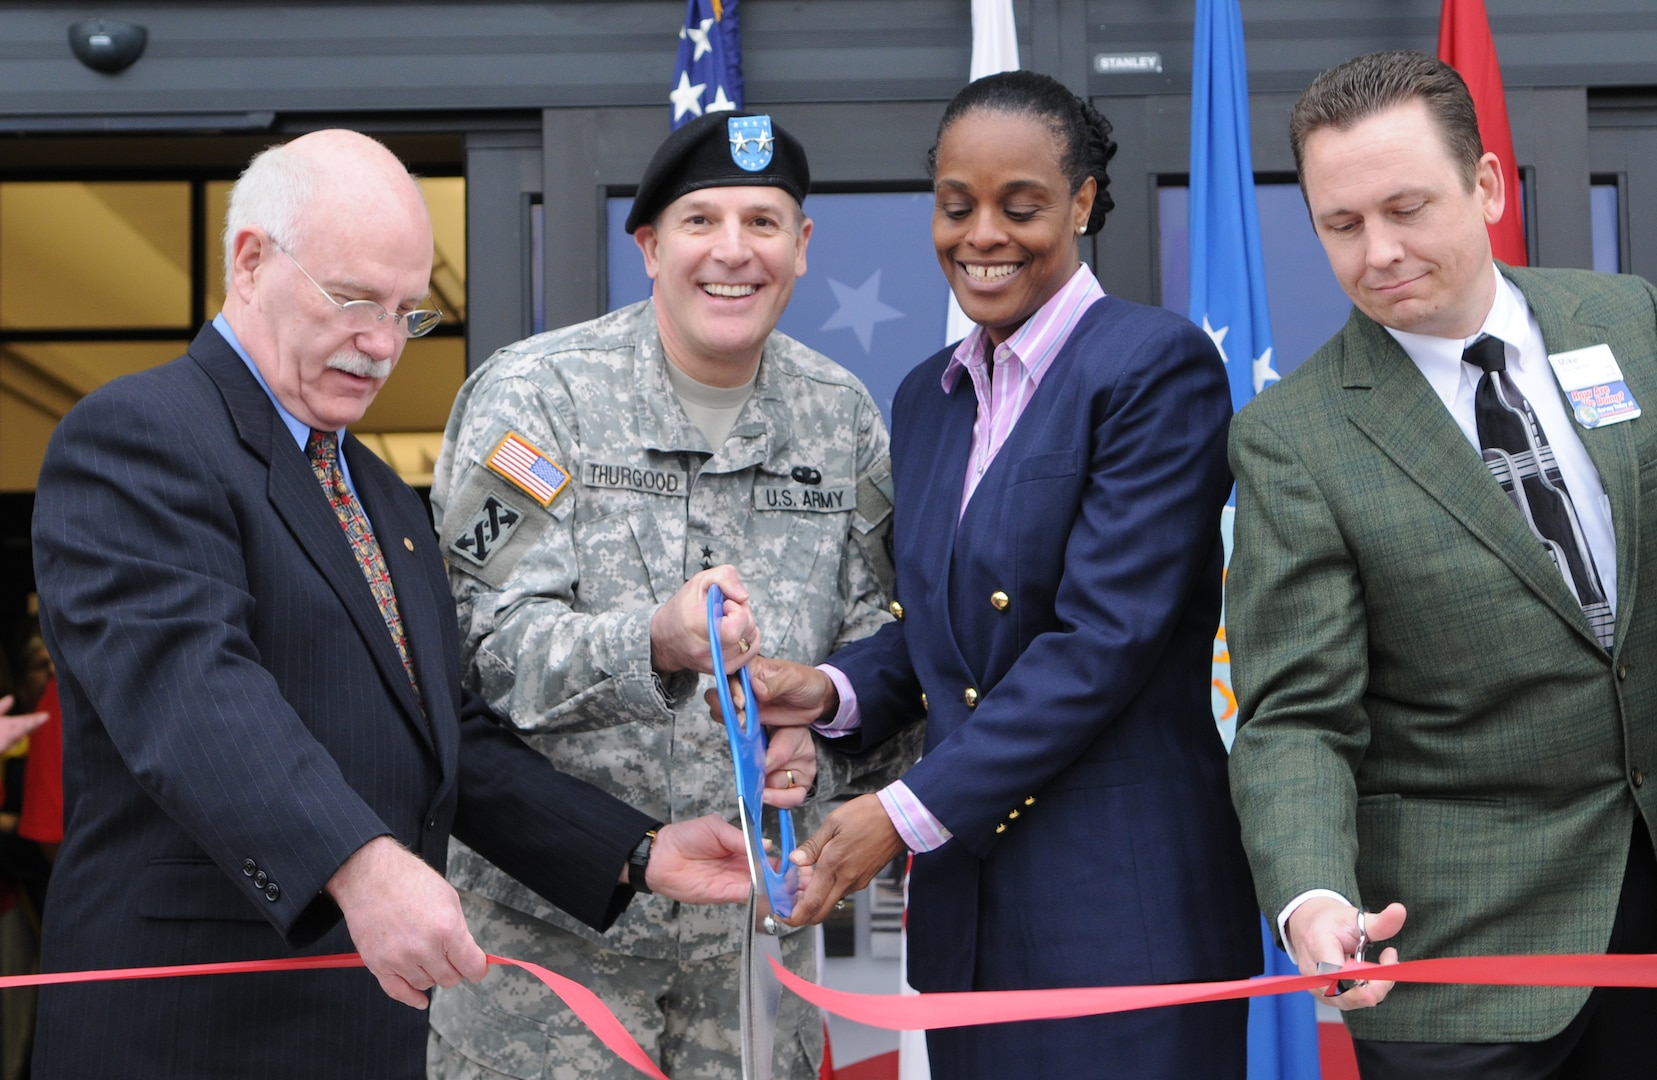 Doors to the new Randolph Air Force Base Exchange opened March 5, with a ribbon cutting ceremony. Event officials cutting the ribbon are (L-R), Robert Graves, Army Maj. Gen. Keith Thurgood, Army and Air Force Exchange Service commander, Shelly Armstrong, and Mike Einer. The new Building is AAFES' first environmentally friendly "green" BX, using energy-effecient glass, lighting, 40 percent recycled material carpet, and HVAC system to reduce the overall operating cost.(U.S. Air Force Photo By Don Lindsey)